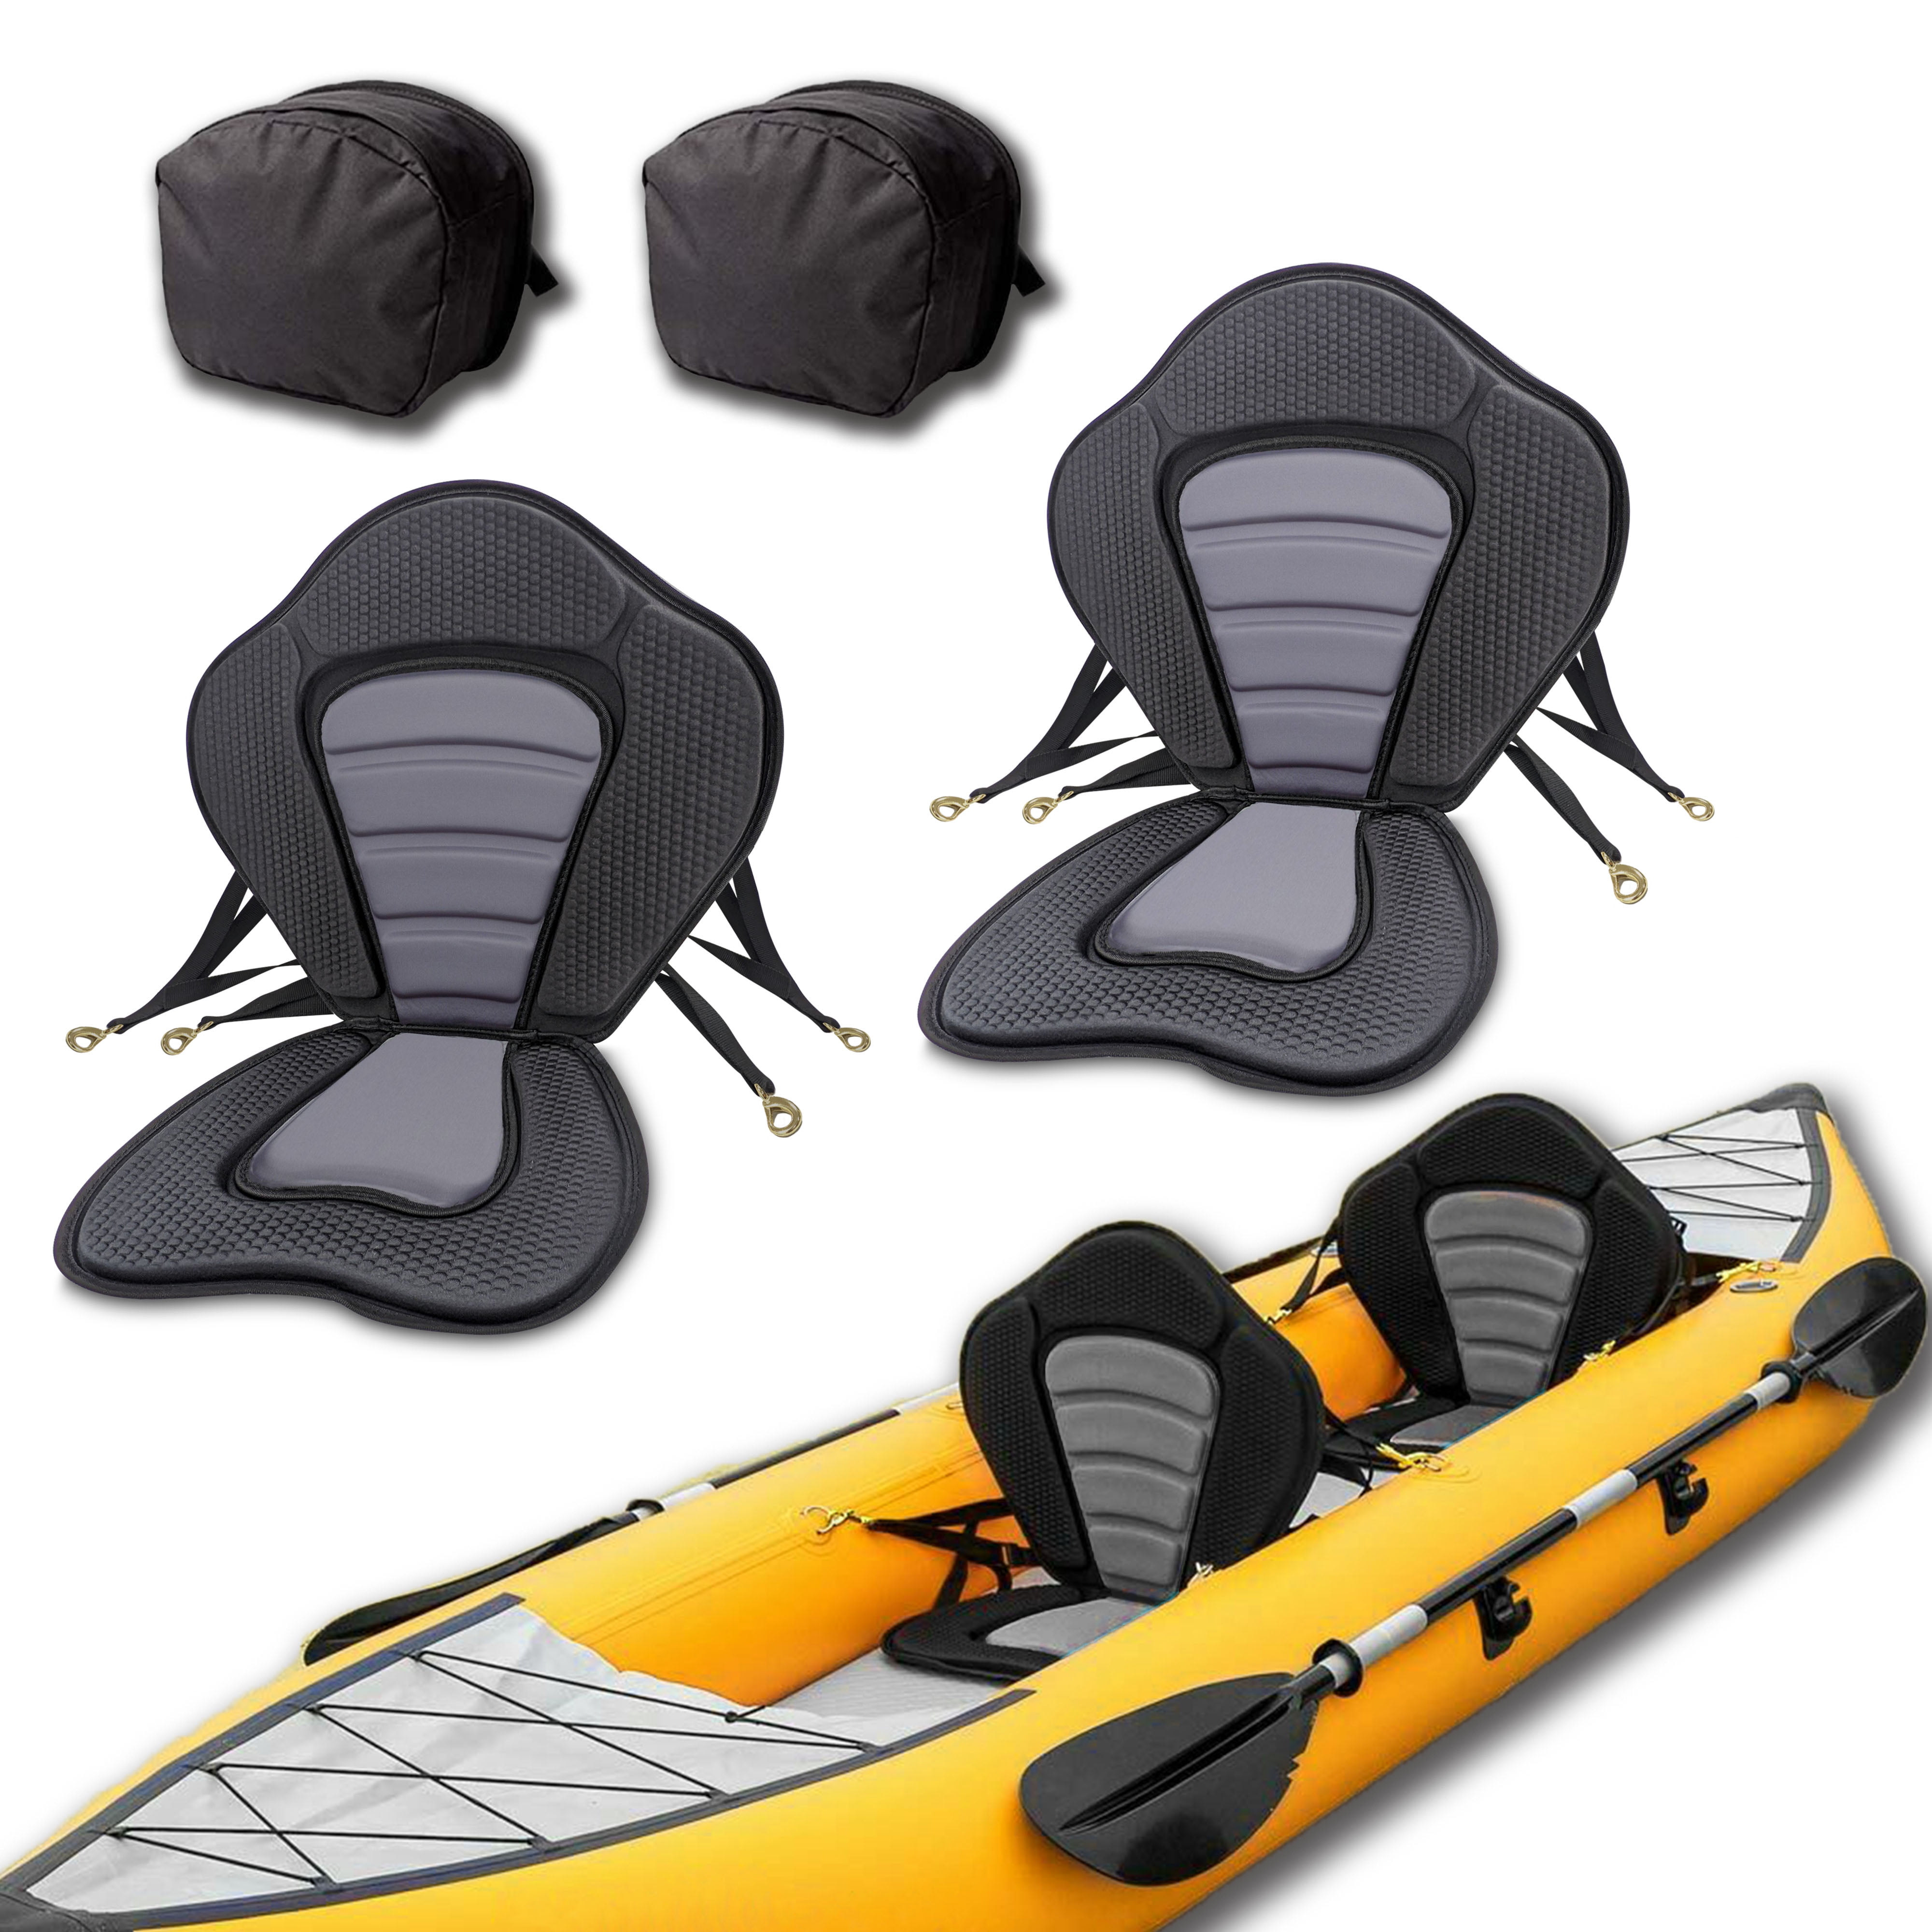 2 Pack Deluxe Padded Inside Kayak Seat with Back Support for sit